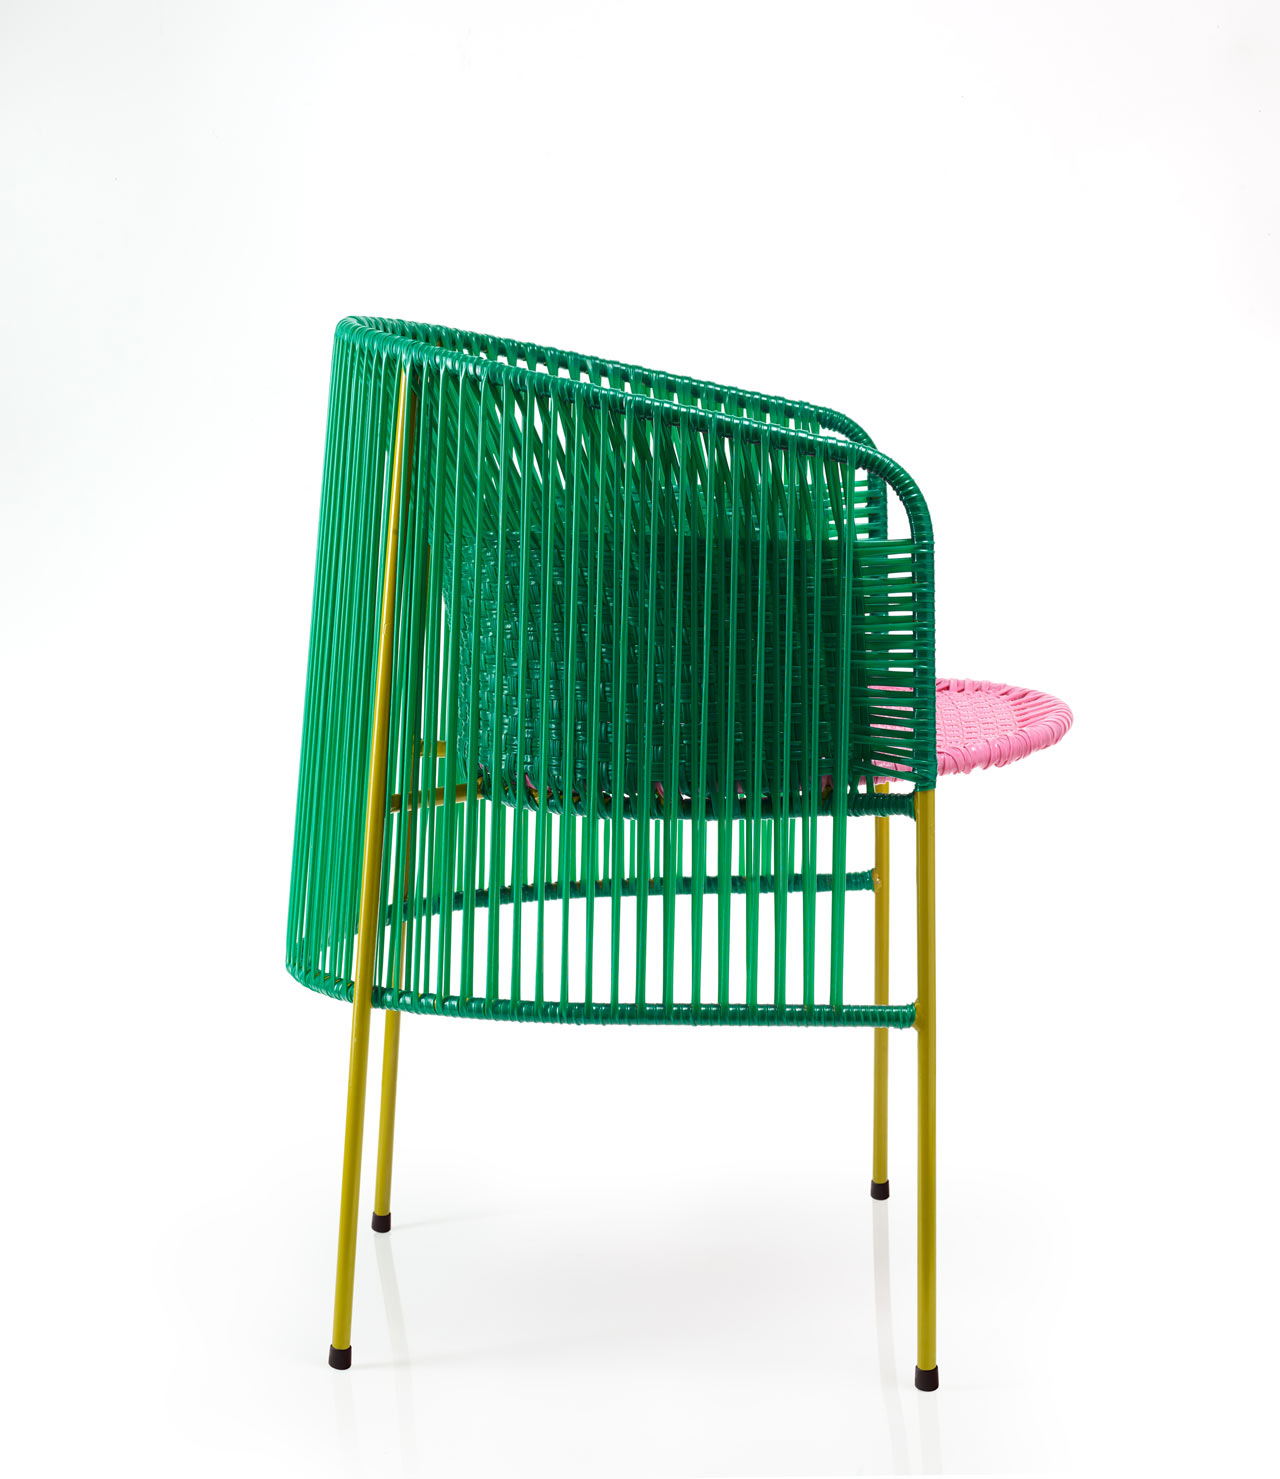 ames Launches CARIBE, a Colorful Outdoor Collection Made of Recycled Plastic-4